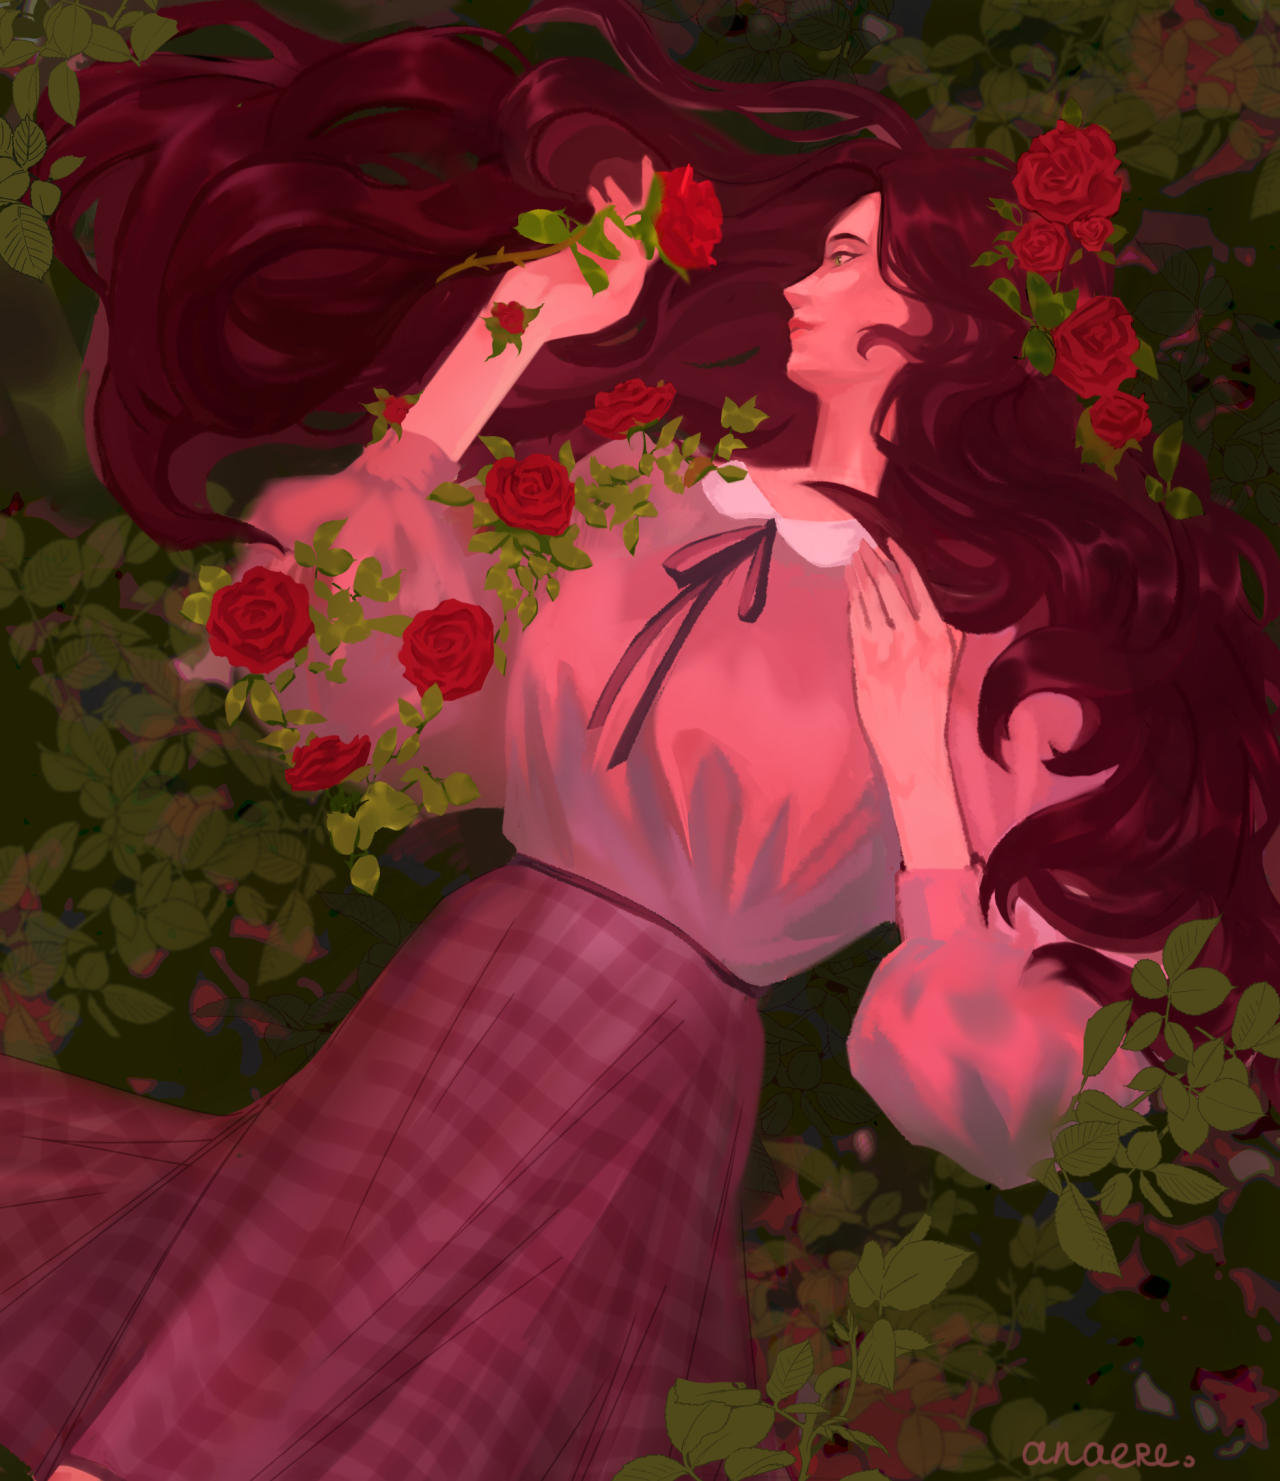 A drawing of Hannah. She's lying down in the grass, her skirt and hair spread out underneath her. Just around her body are many roses. It's unclear if the roses are growing from the ground underneath her or are growing from her hair and clothes.